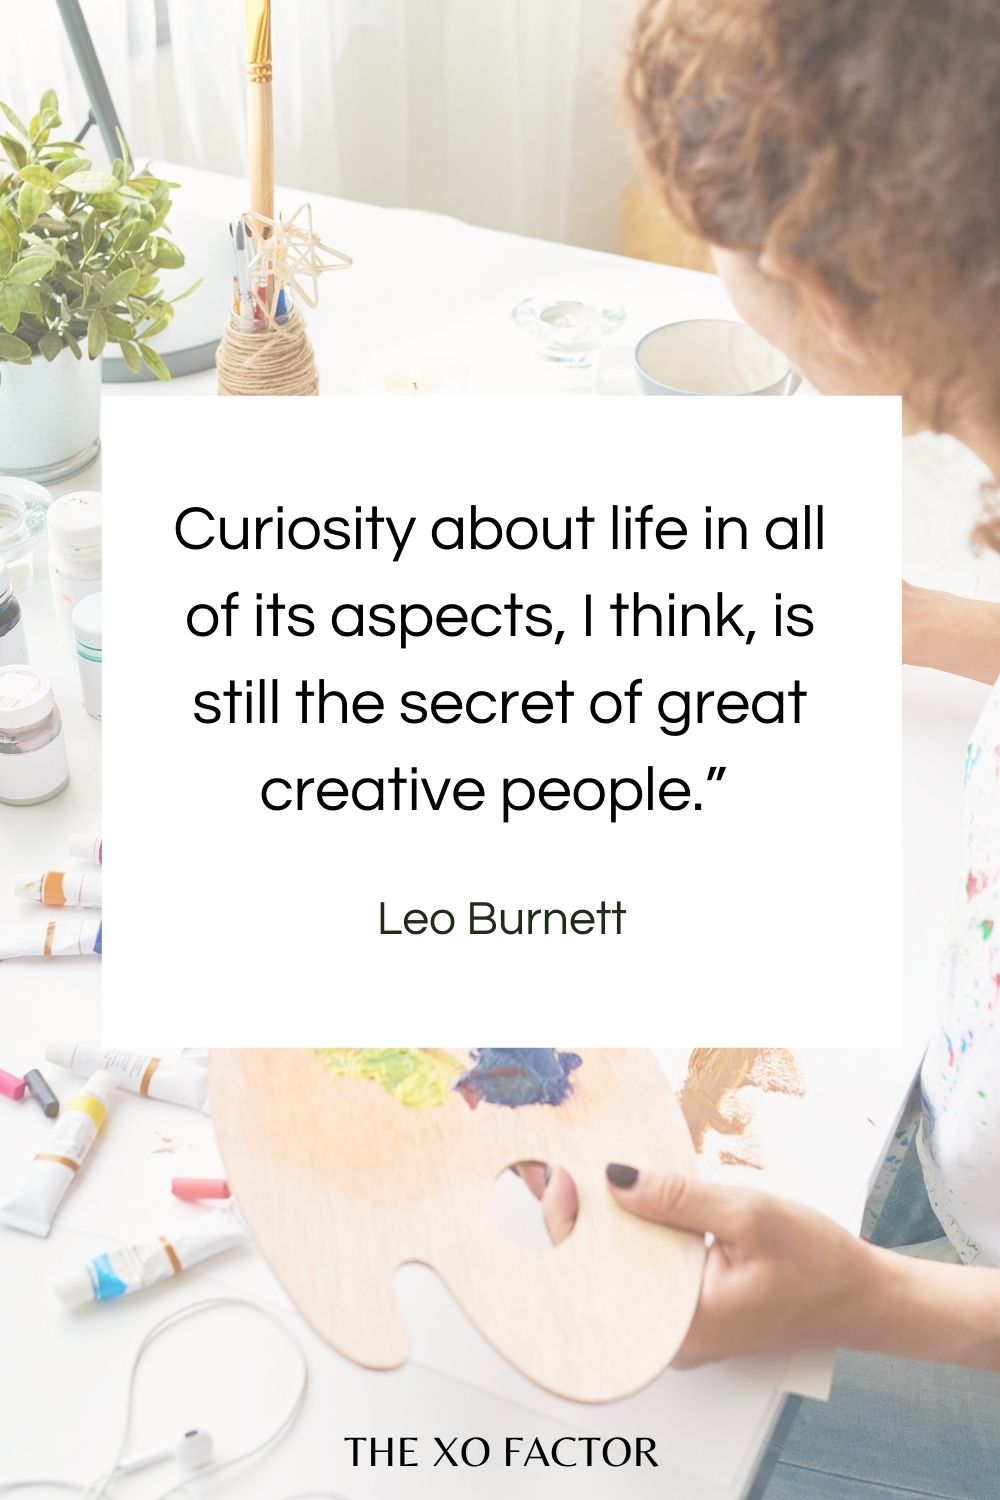 Curiosity about life in all of its aspects, I think, is still the secret of great creative people.”  Leo Burnett